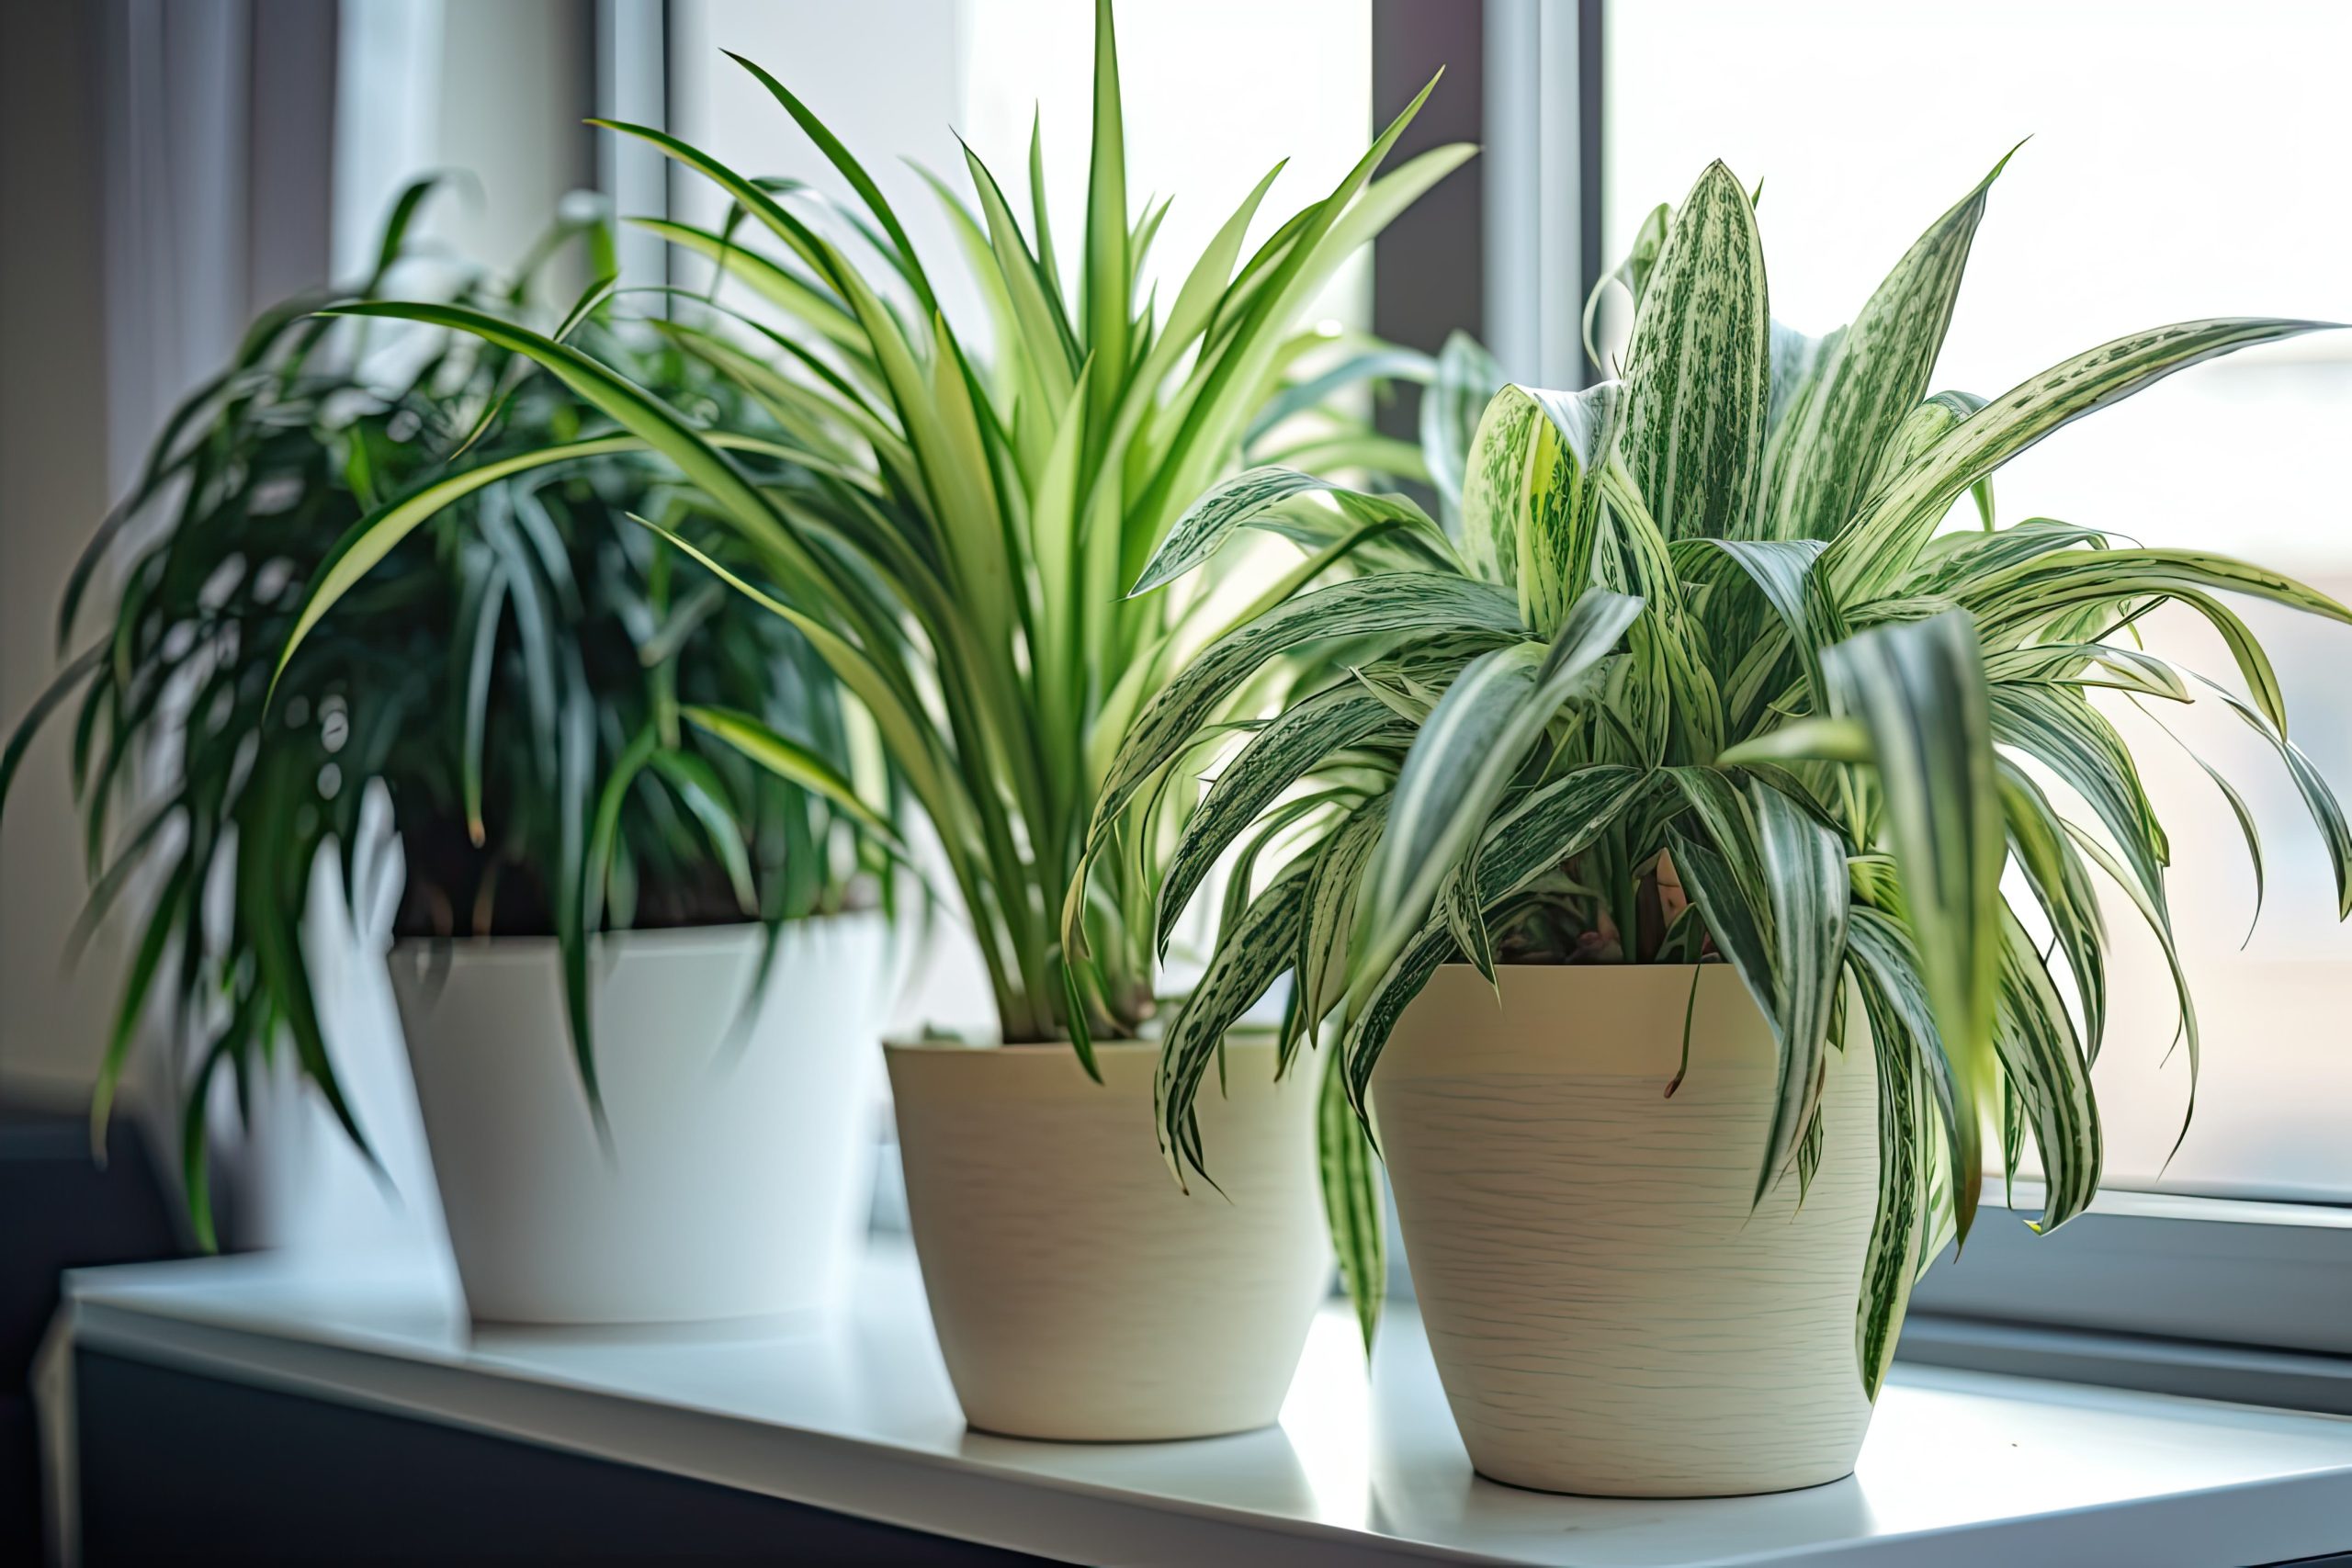 Air-purifying plants to improve home indoor air quality. Air-purifying houseplants, like spider plants and peace lilies, can help remove toxins from the air.